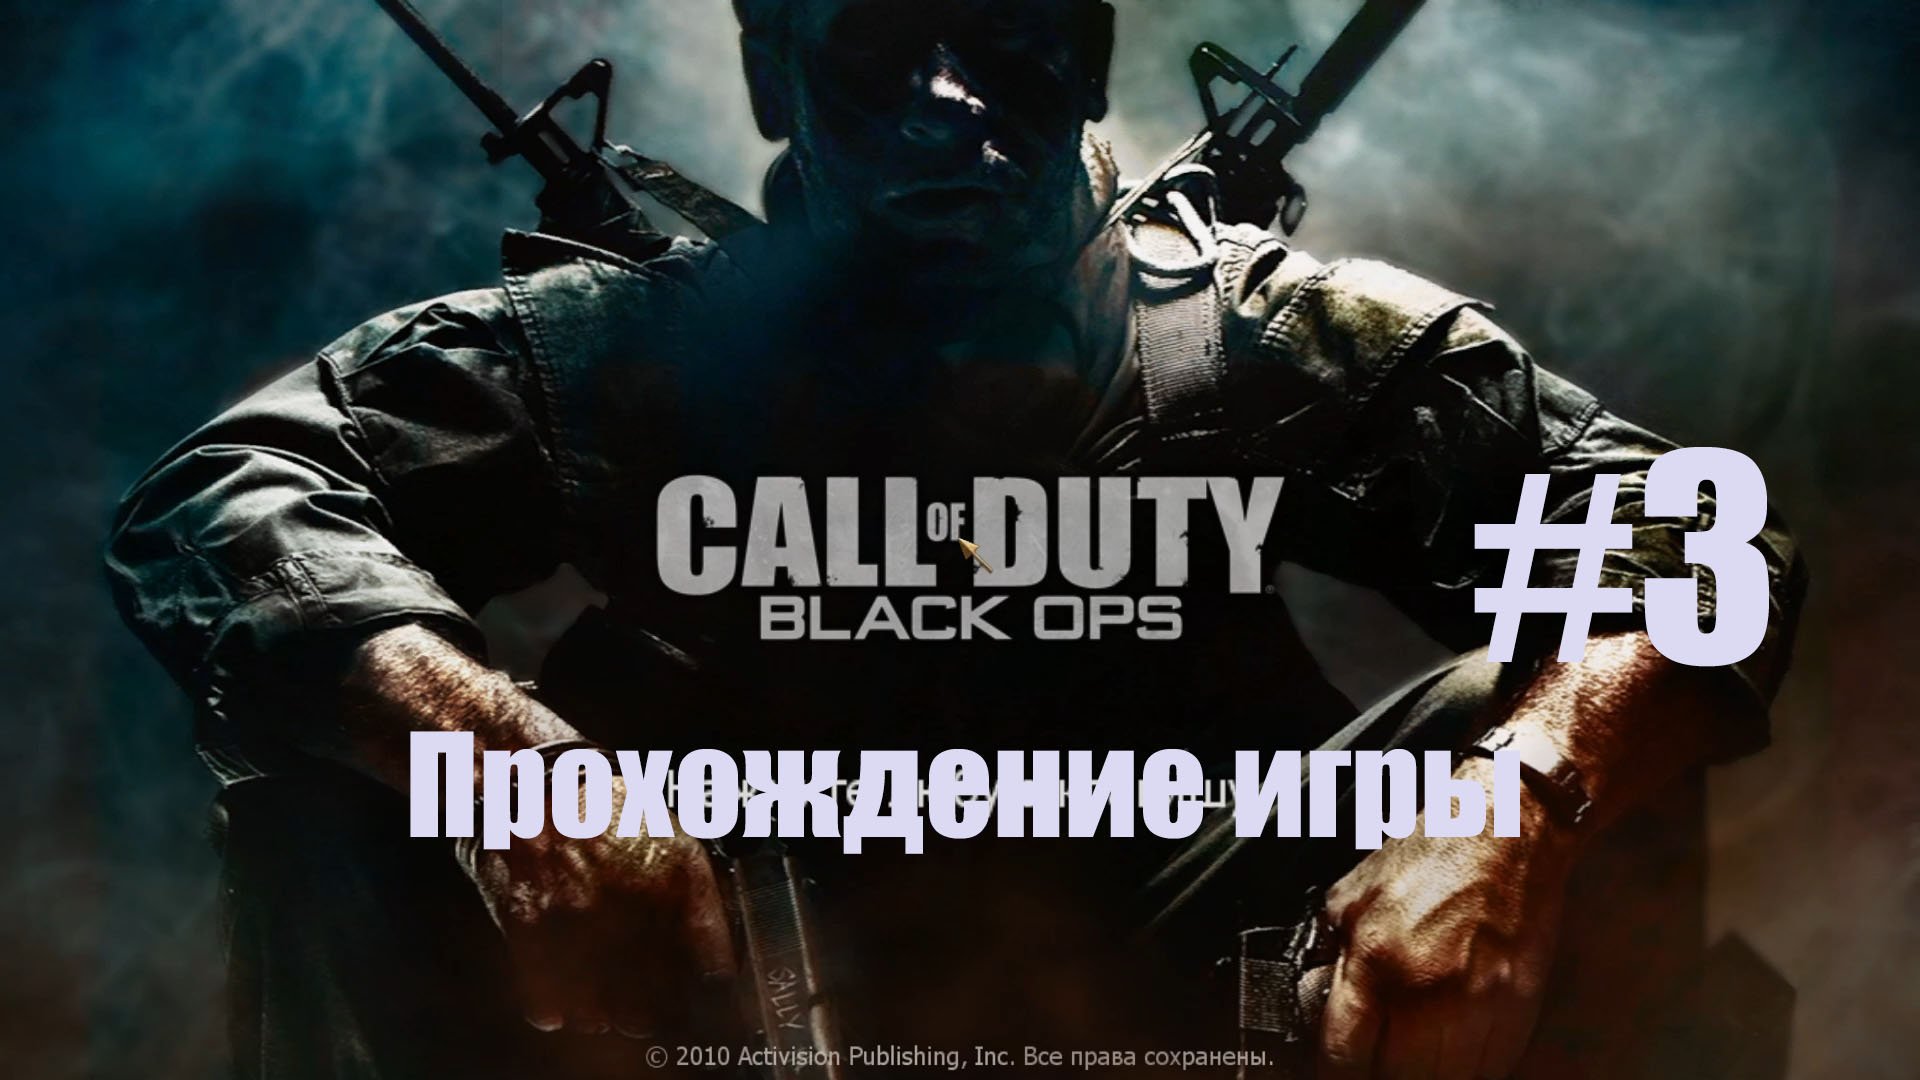 Call of Duty Black Ops #3